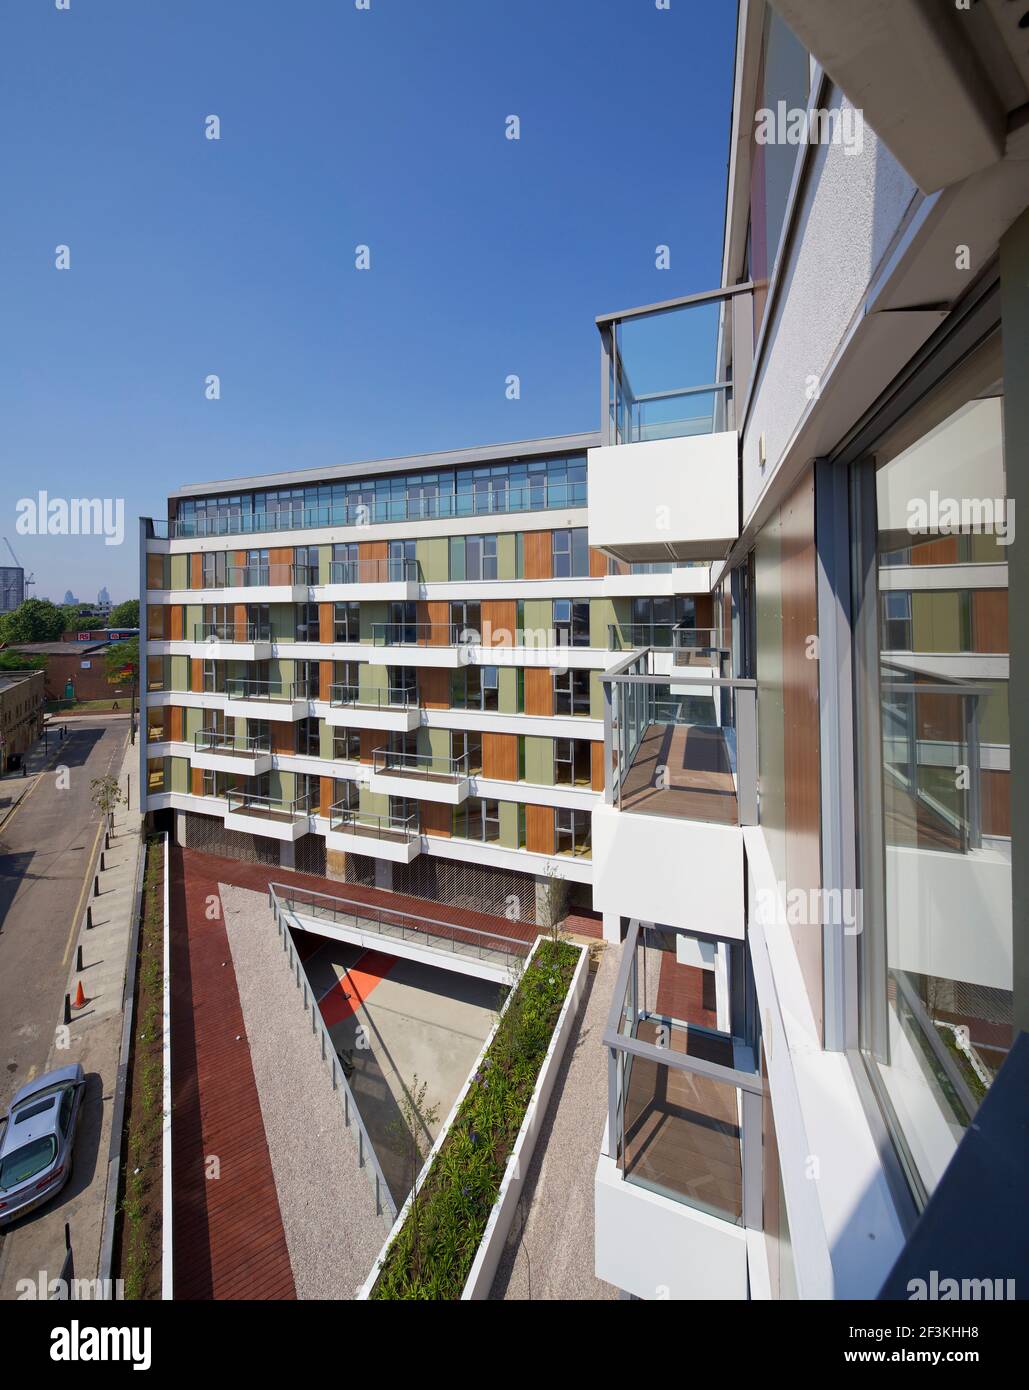 419 Wick Lane, London. New apartments built by Development securities Plc opposite the new Olympic Stadium in London. Stock Photo